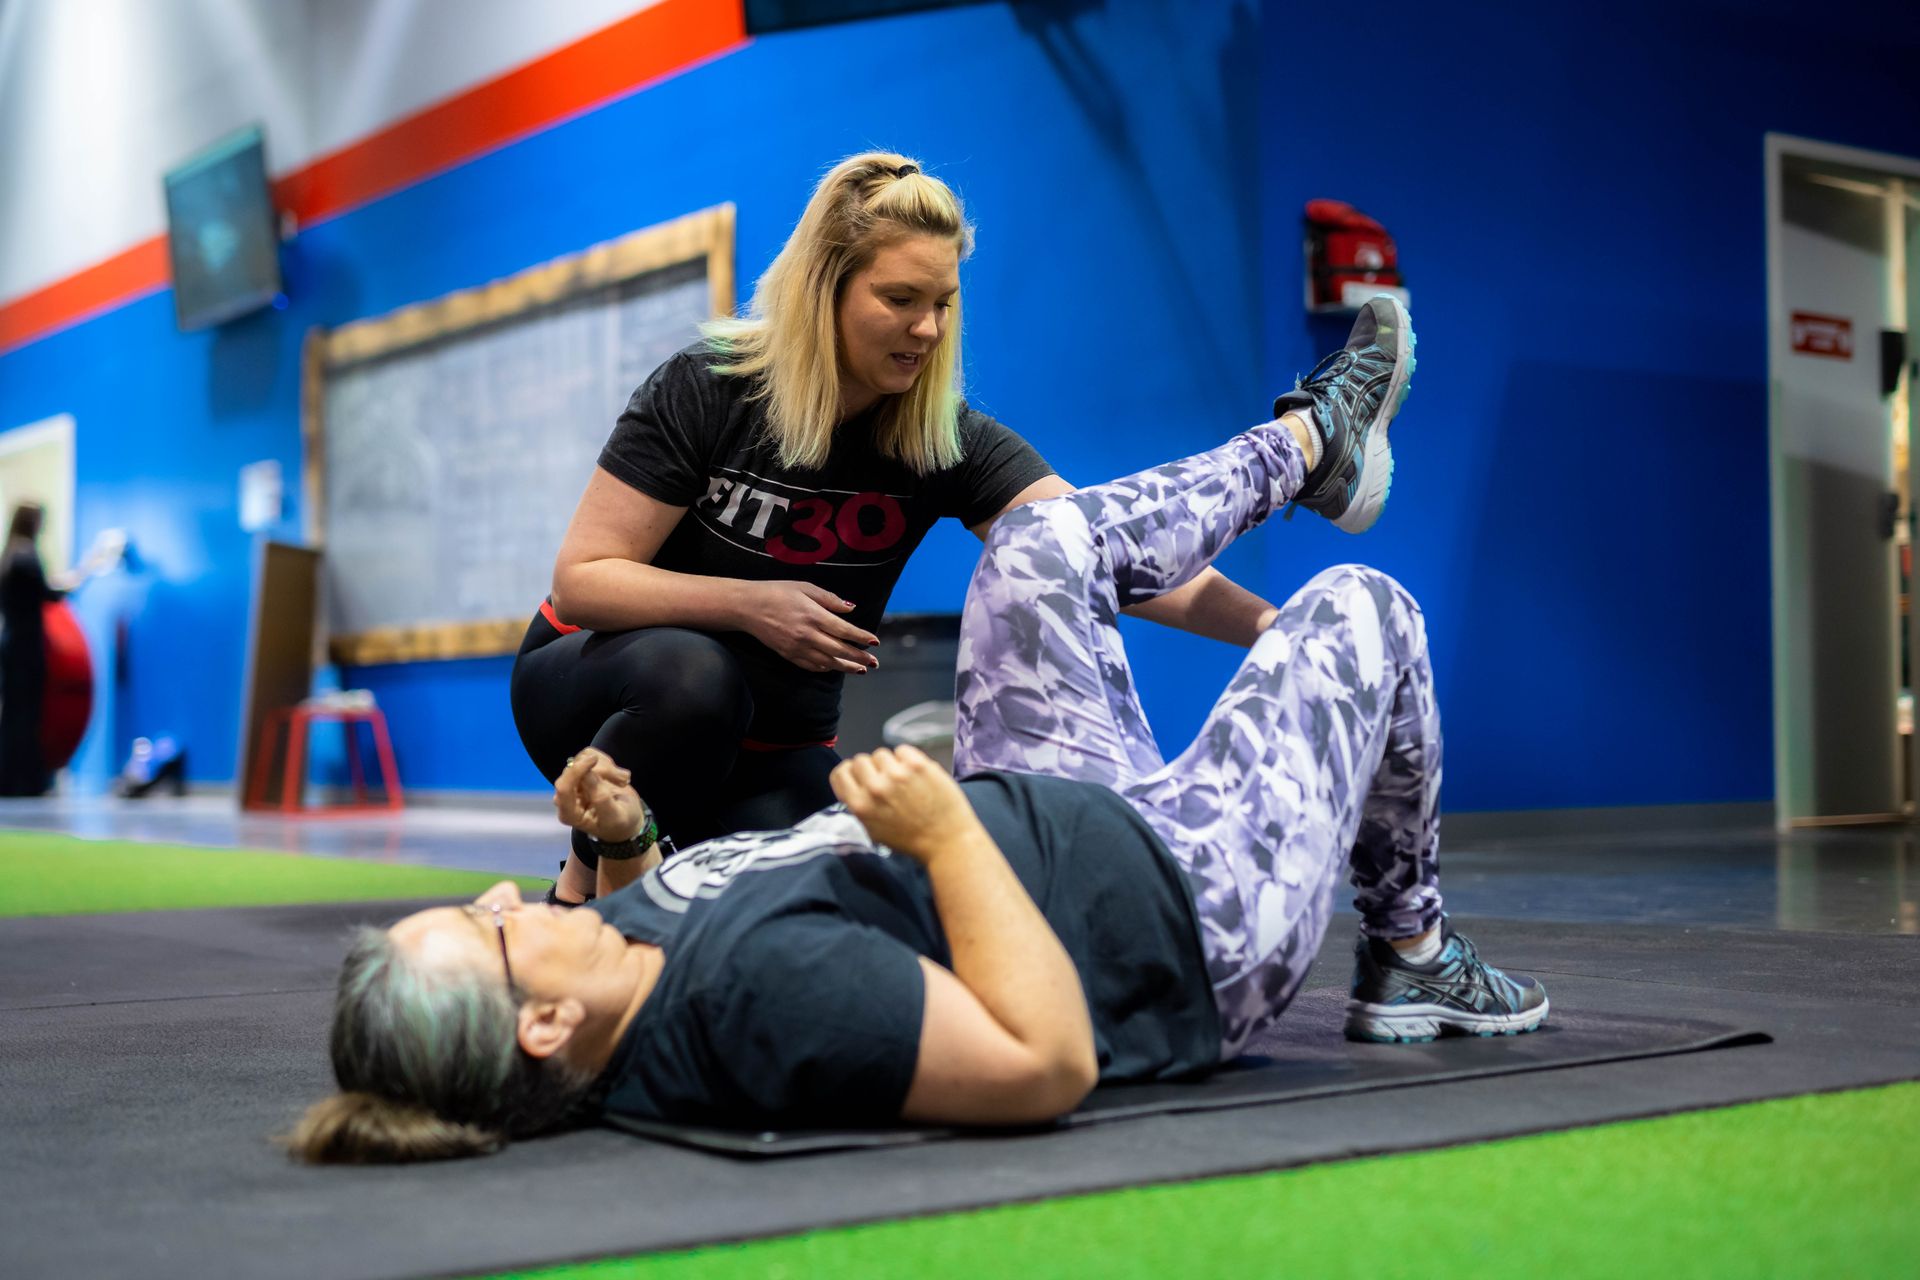 Senior personal training at Freedom Fitness, Our trainers can help you avoid injury and get into shape.